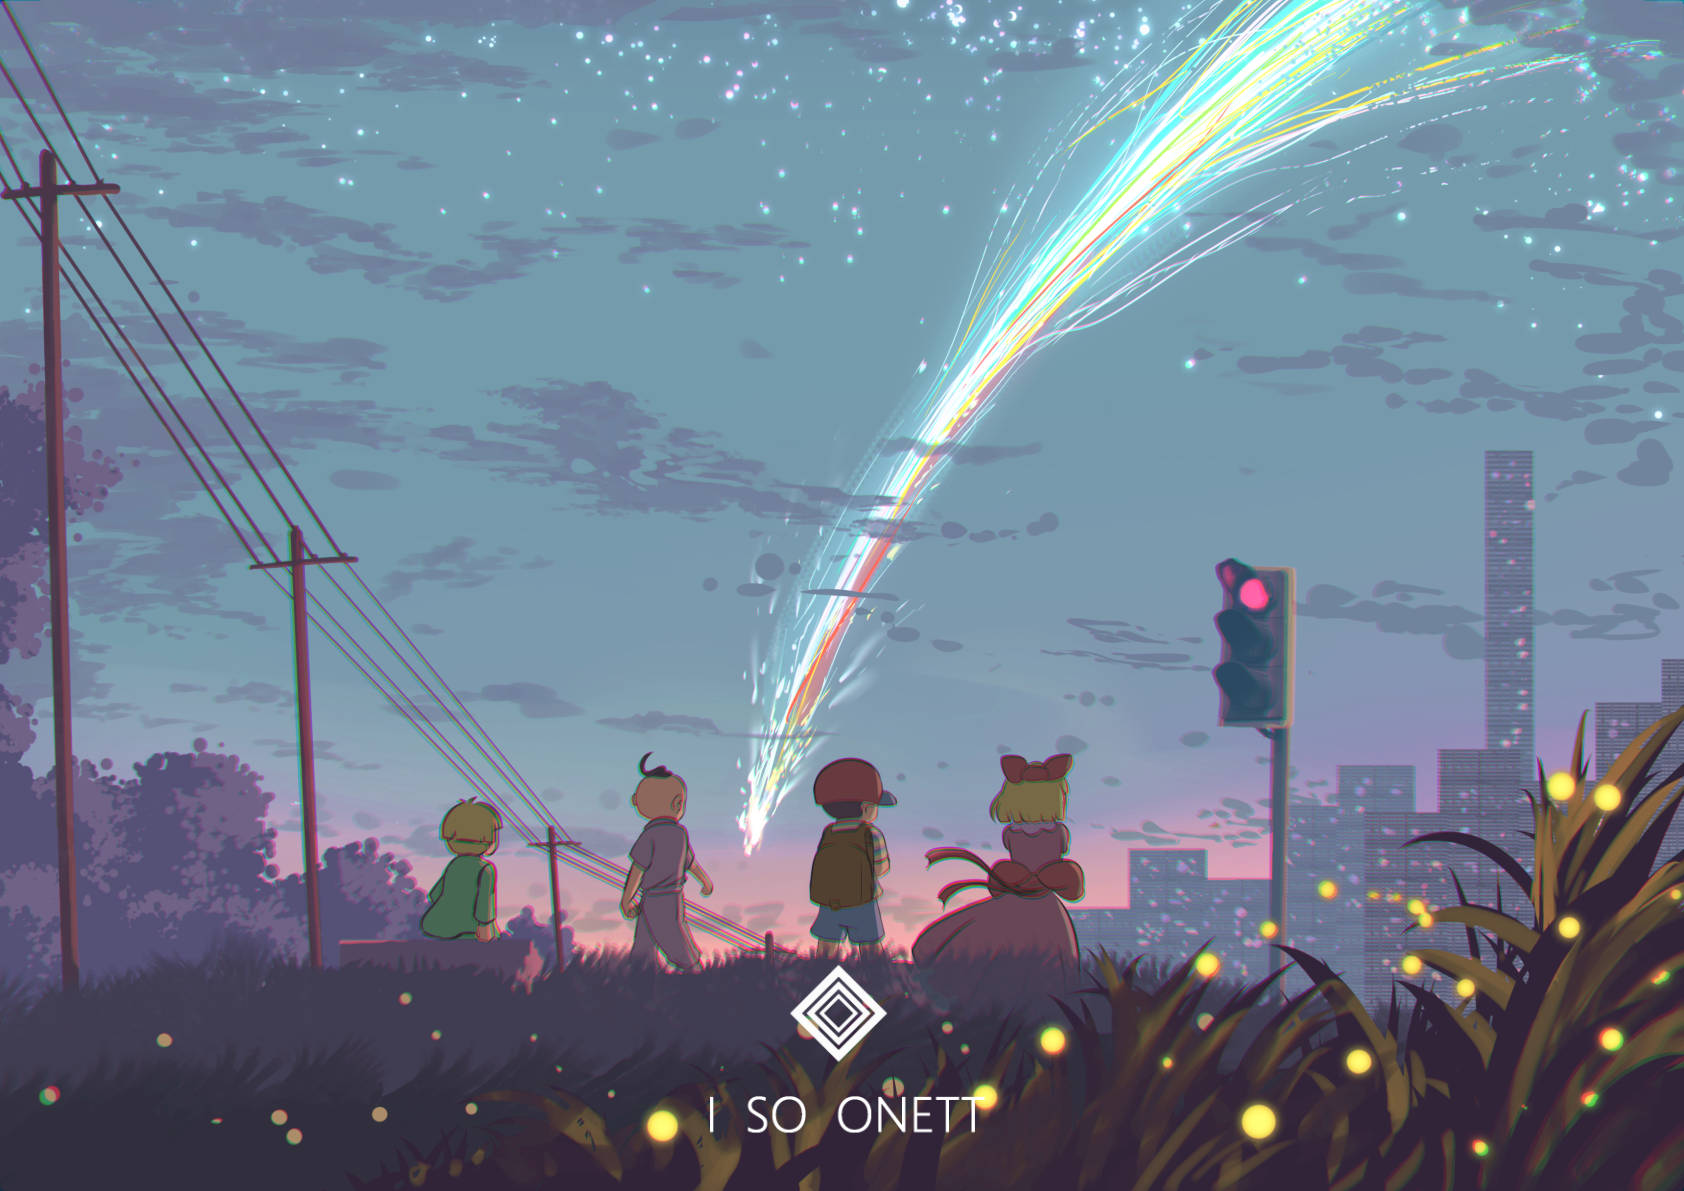 Surreal Urban Scene of Earthbound with Comets Wallpaper